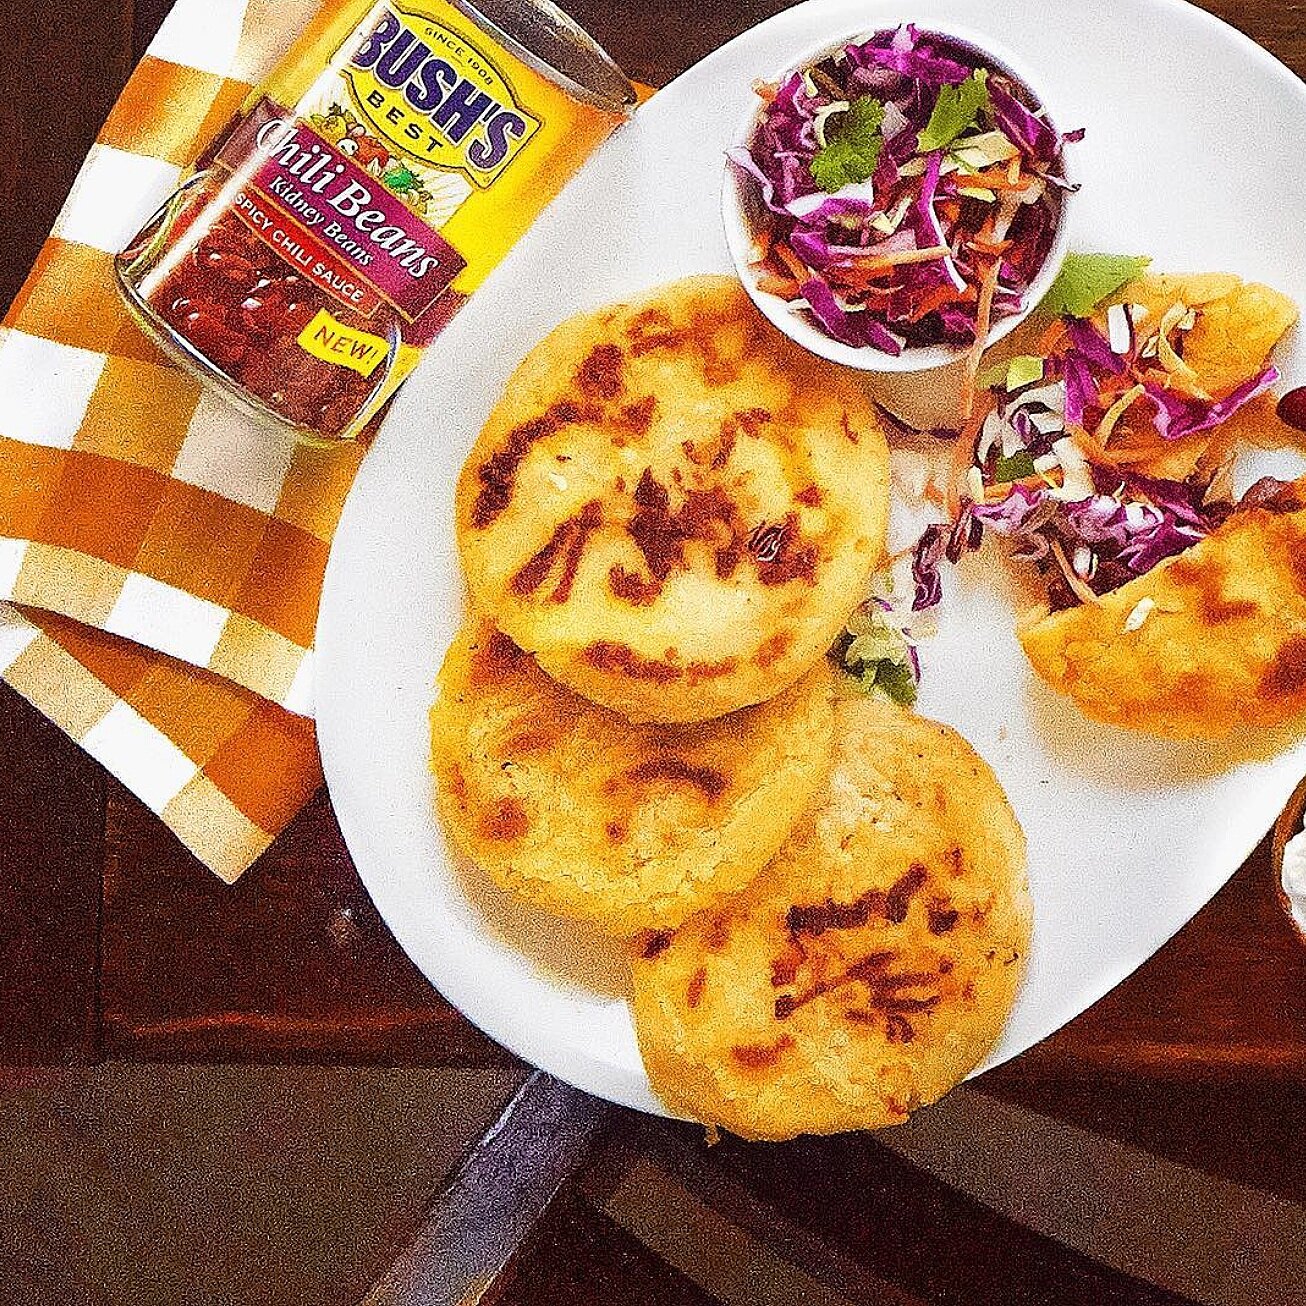 Stuff fresh pupusa dough with spicy chili beans and you're on your way to pillowy heaven ☁️